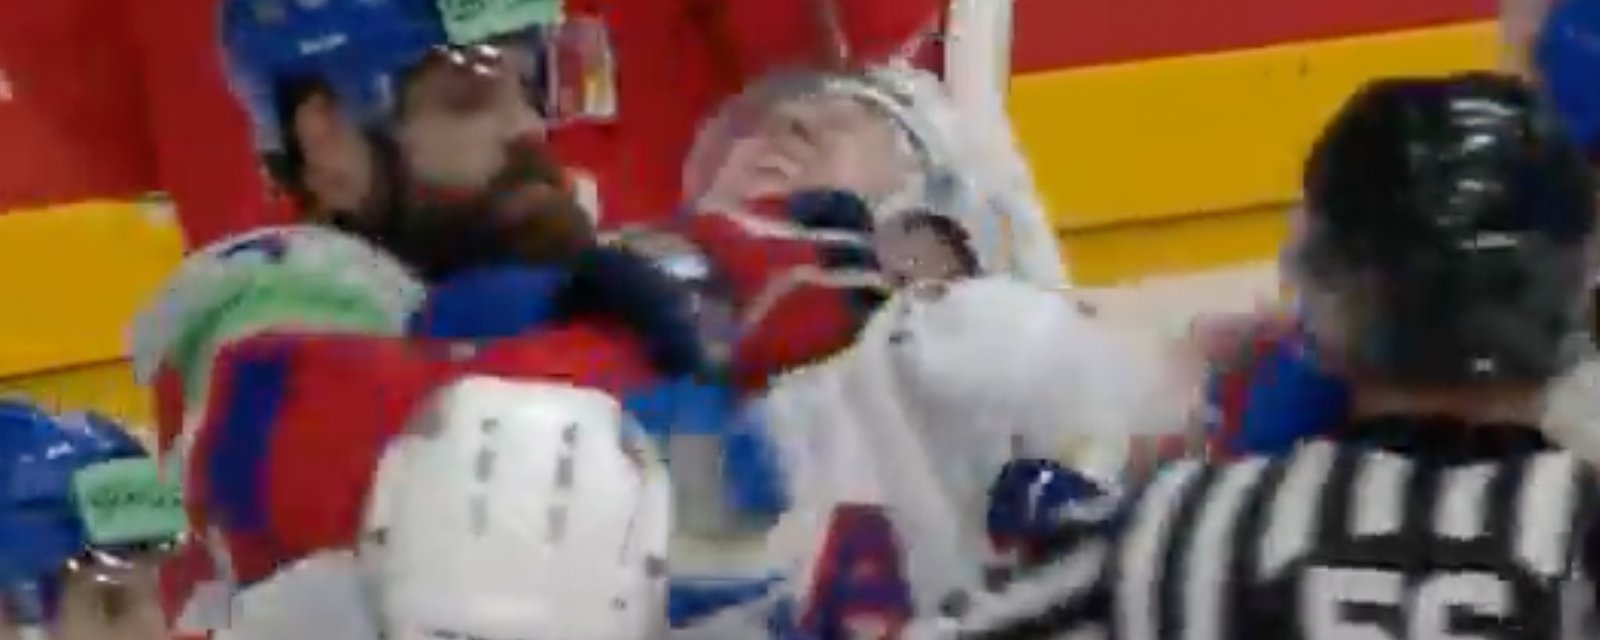 Brady Tkachuk appears to get choked out by Radko Gudas during a game!